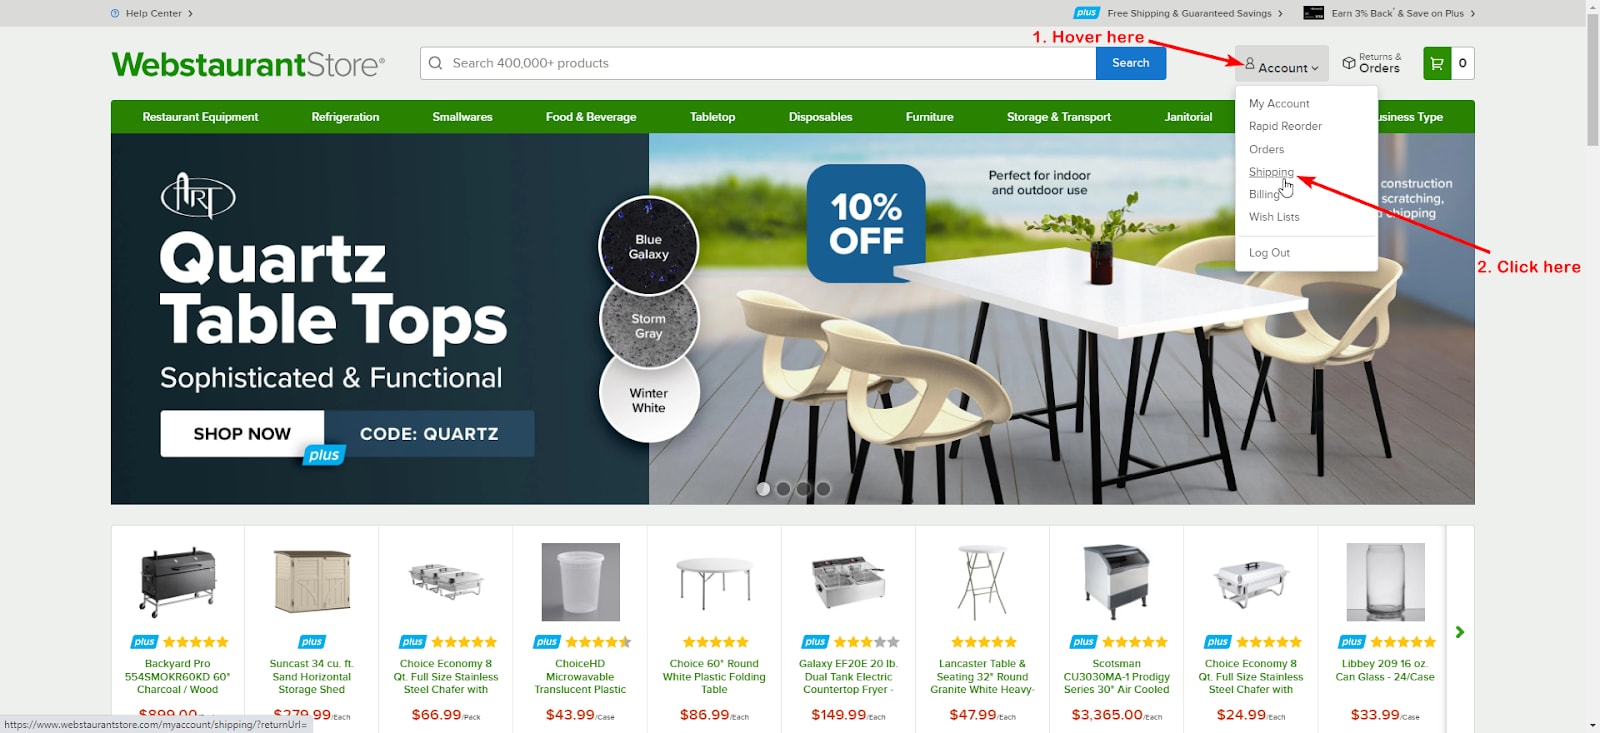 Webstaurant Store Member Home Page